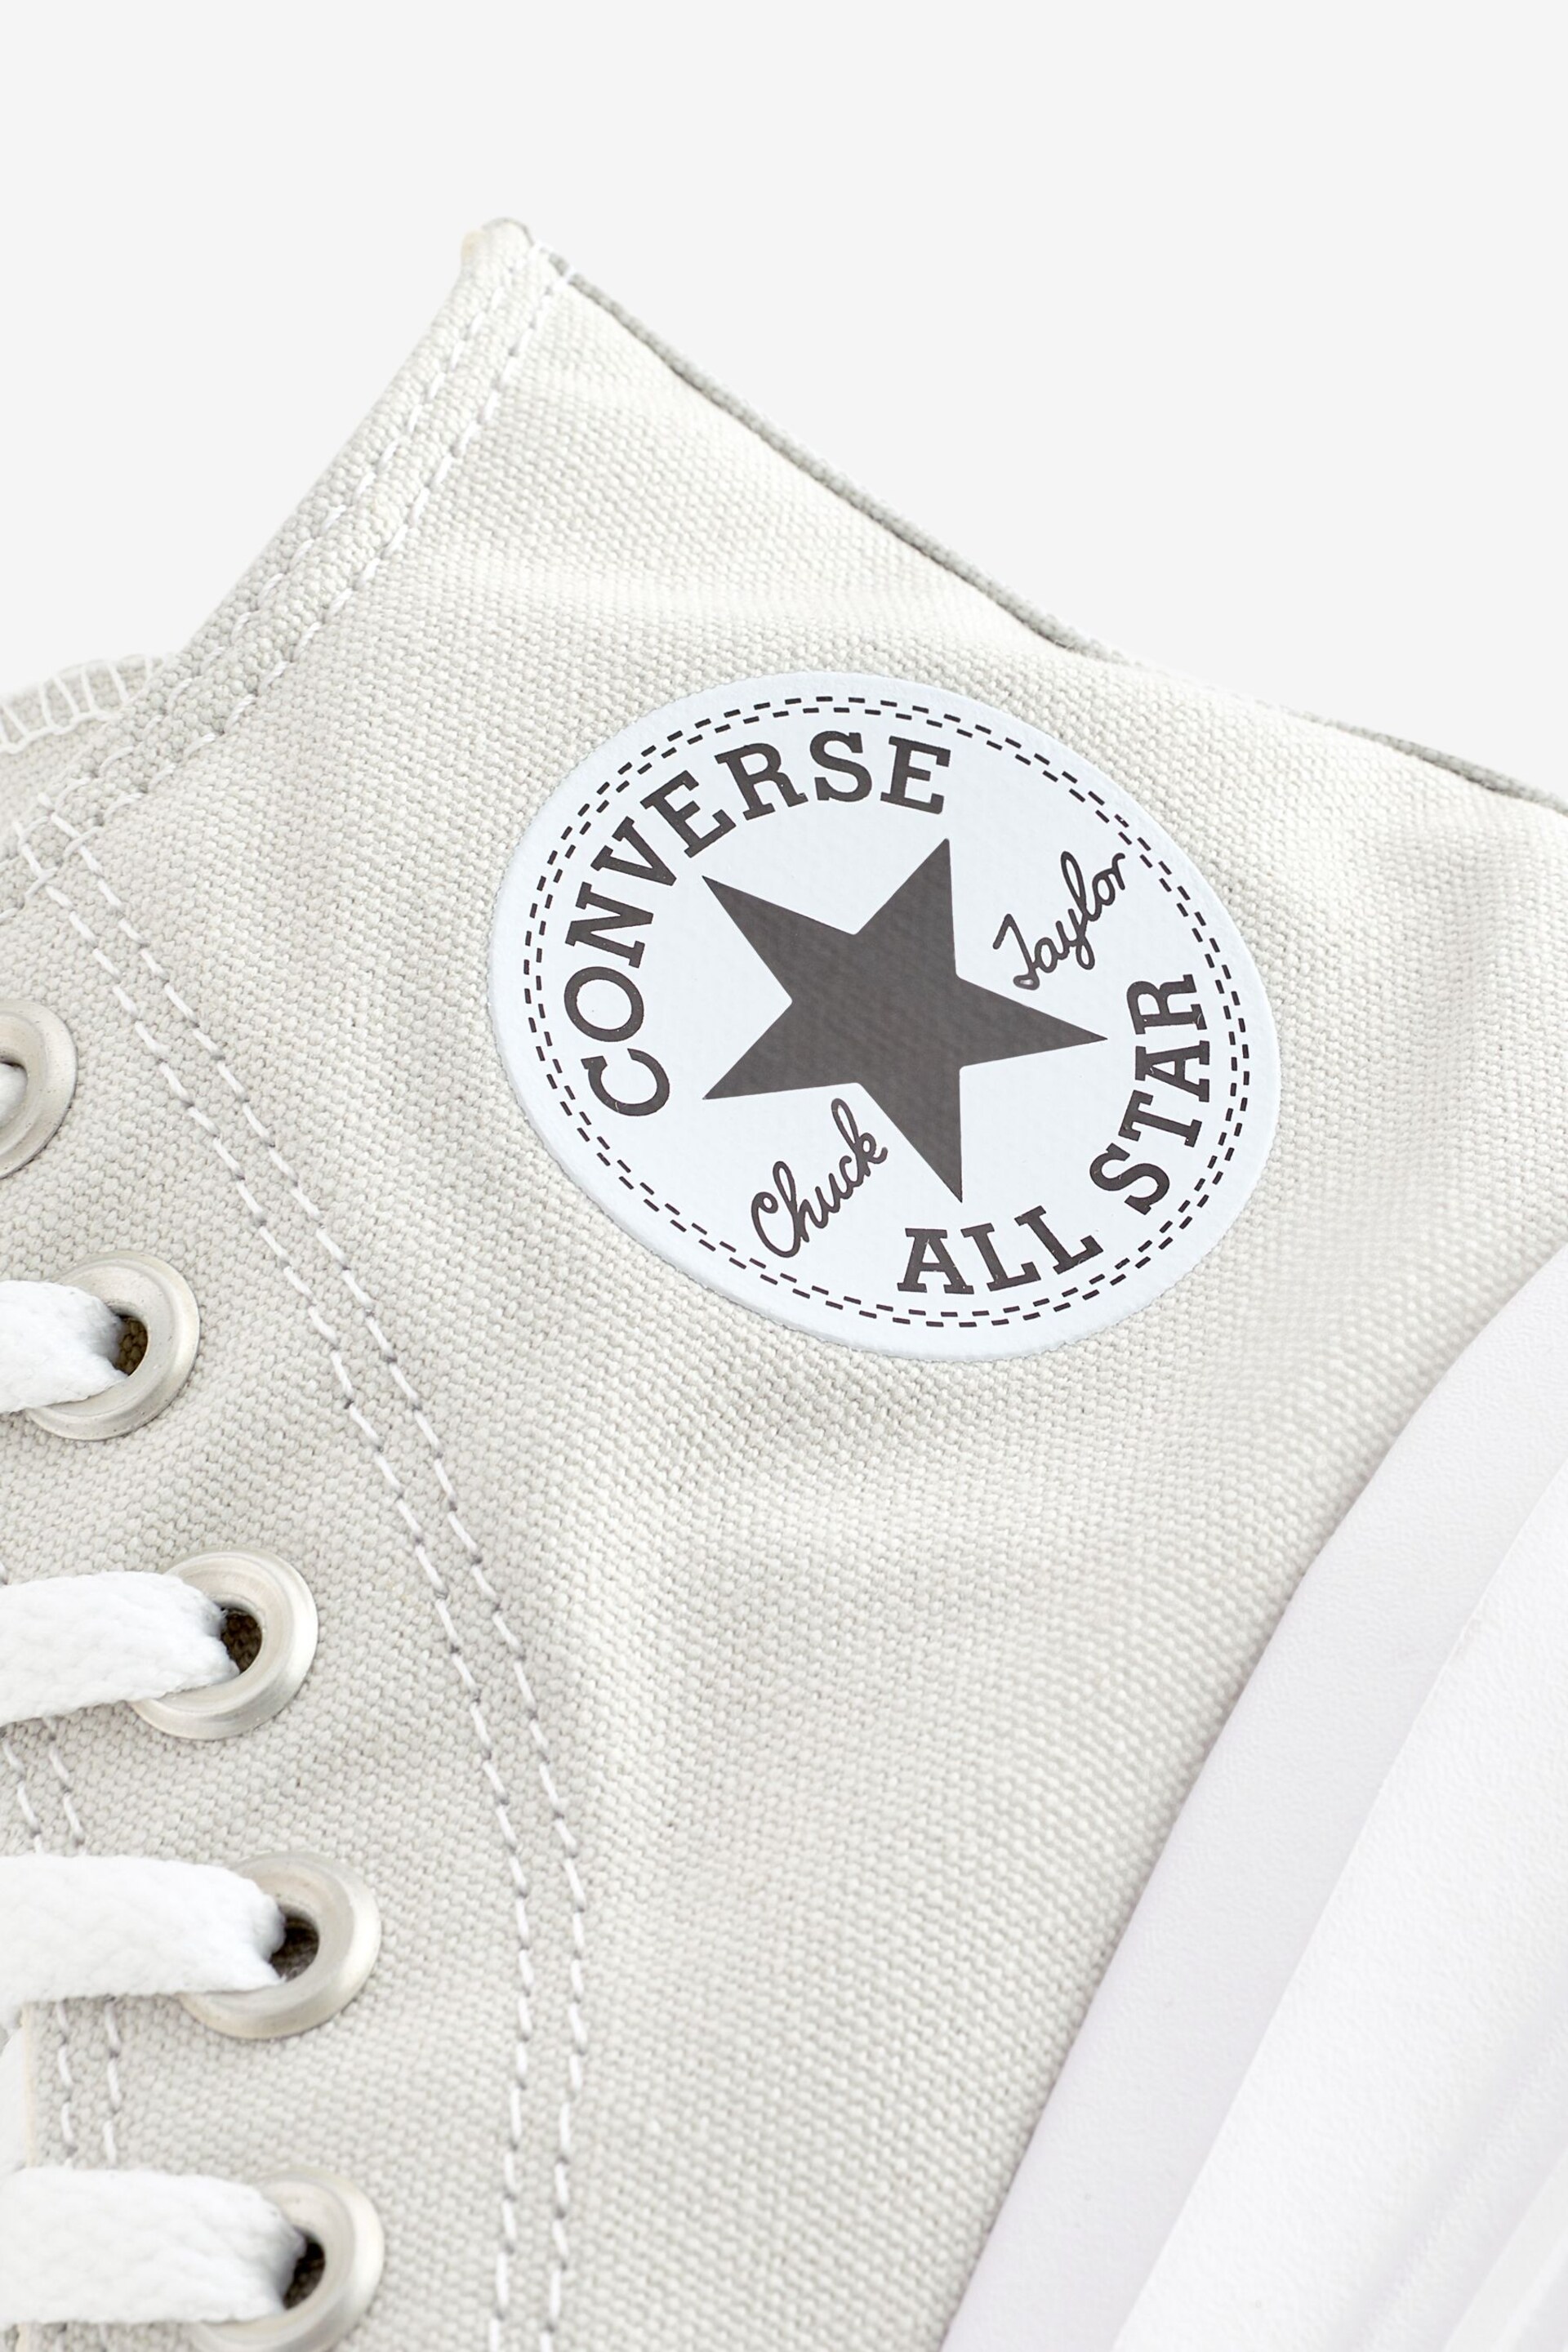 Converse Grey Chuck Taylor All Star Move High Top Trainers - Image 7 of 10